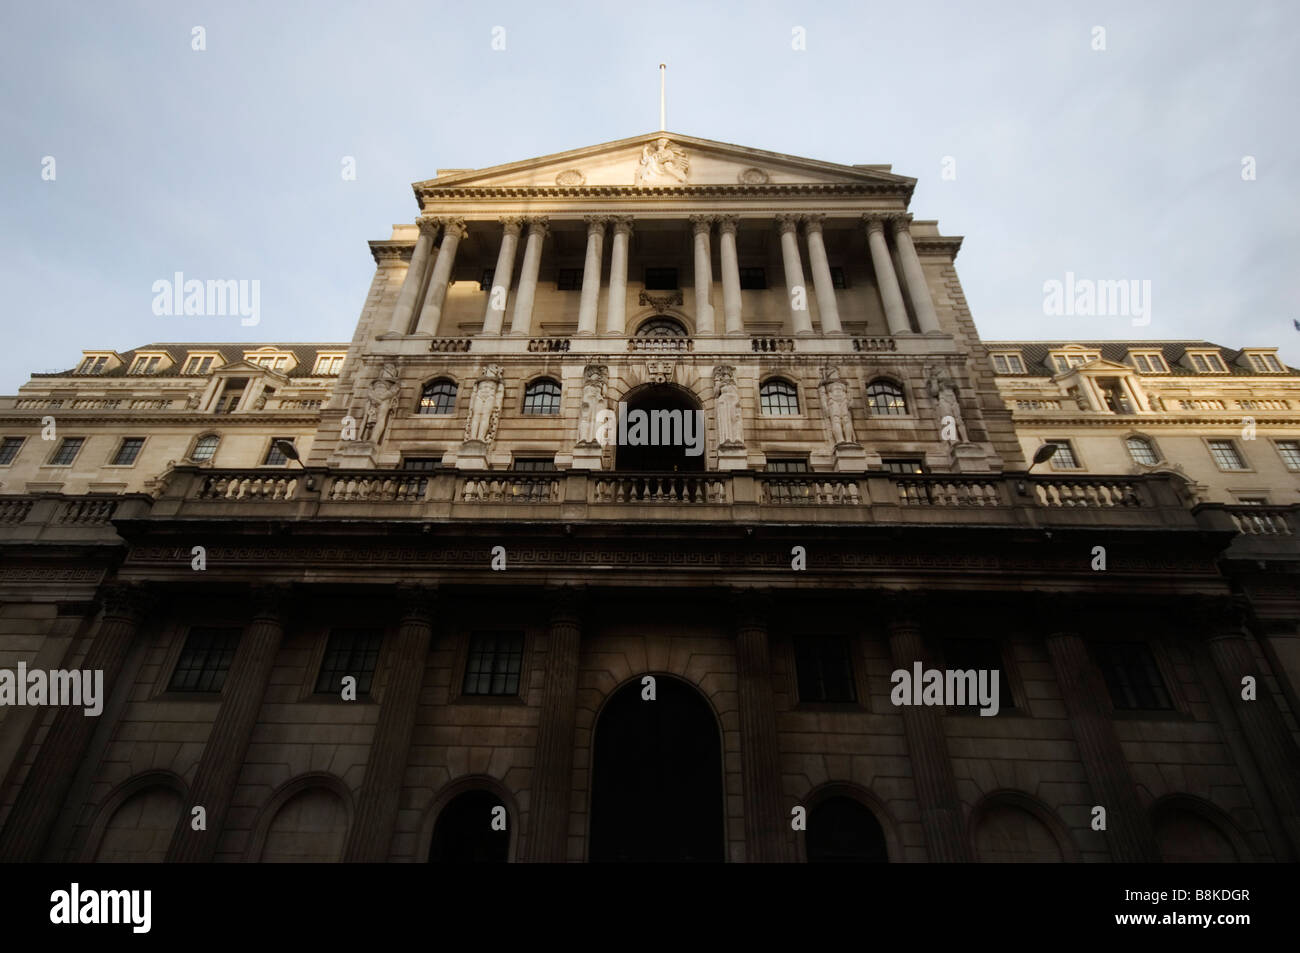 The Bank of England Building in Threadneedle Street London Stock Photo